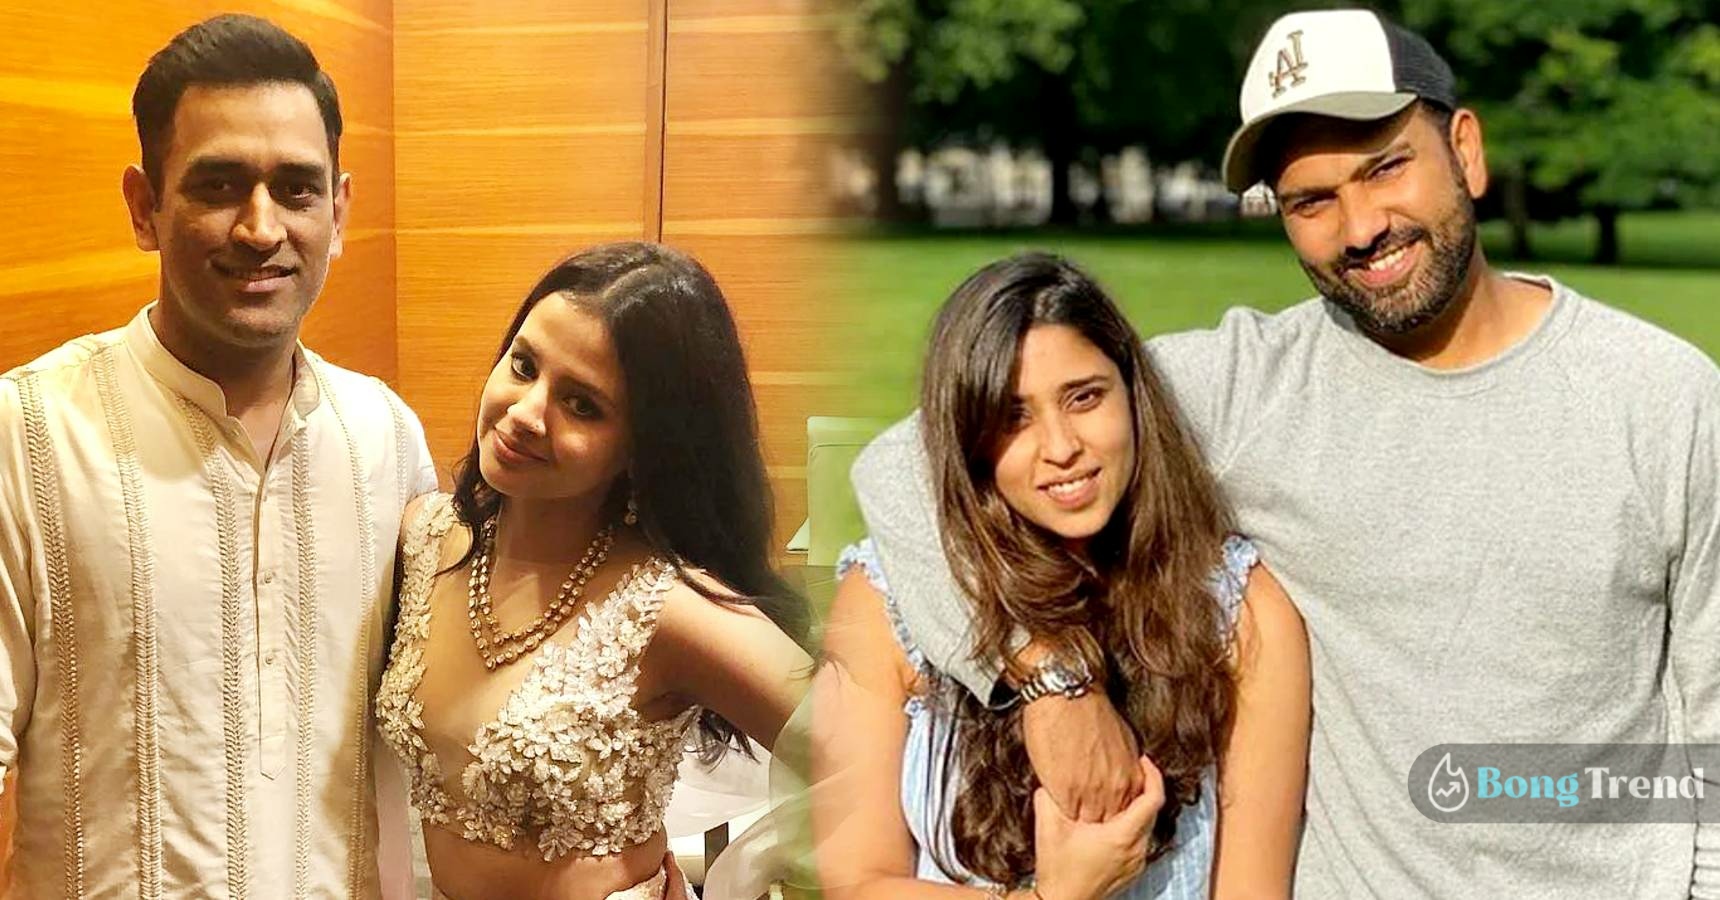 Take a look at the filmy love story of famous Indian cricketers